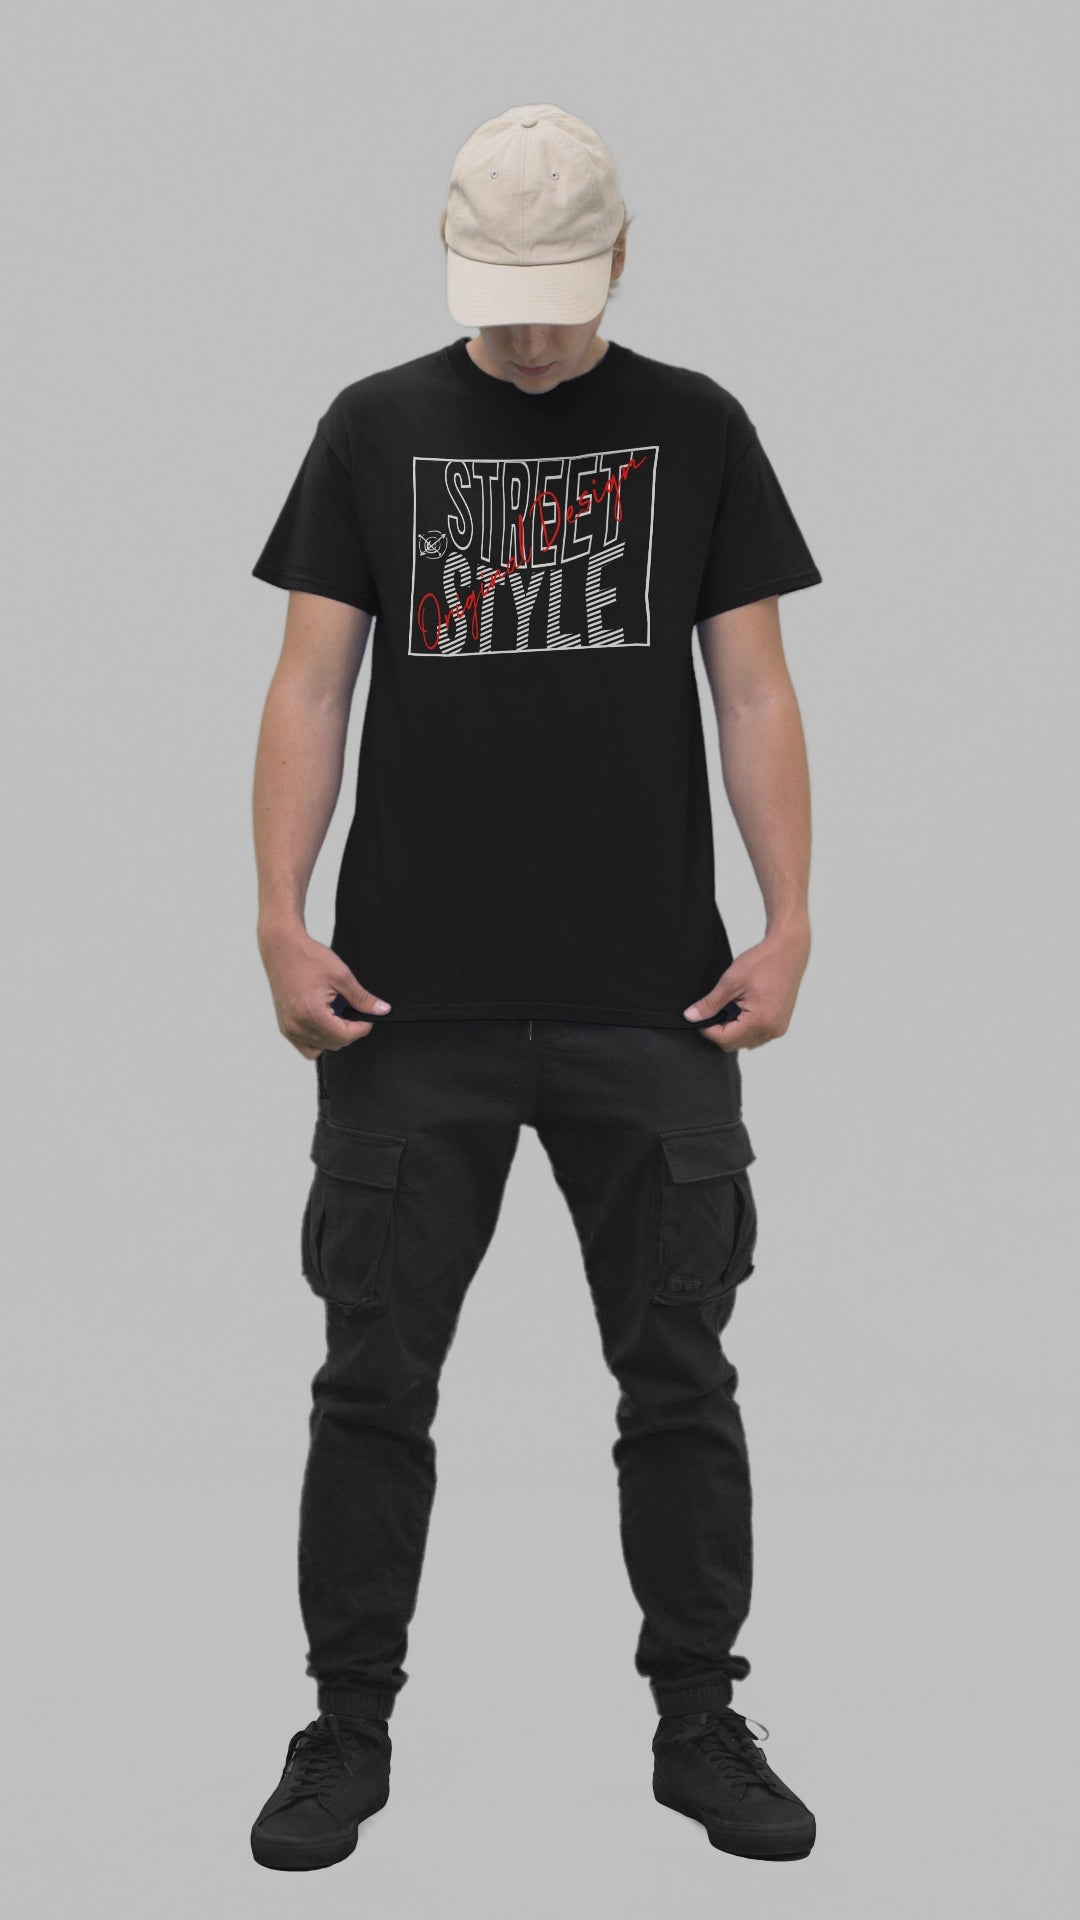 A young person wearing a black t-shirt with 'STREET STYLE' printed in bold red and white letters.